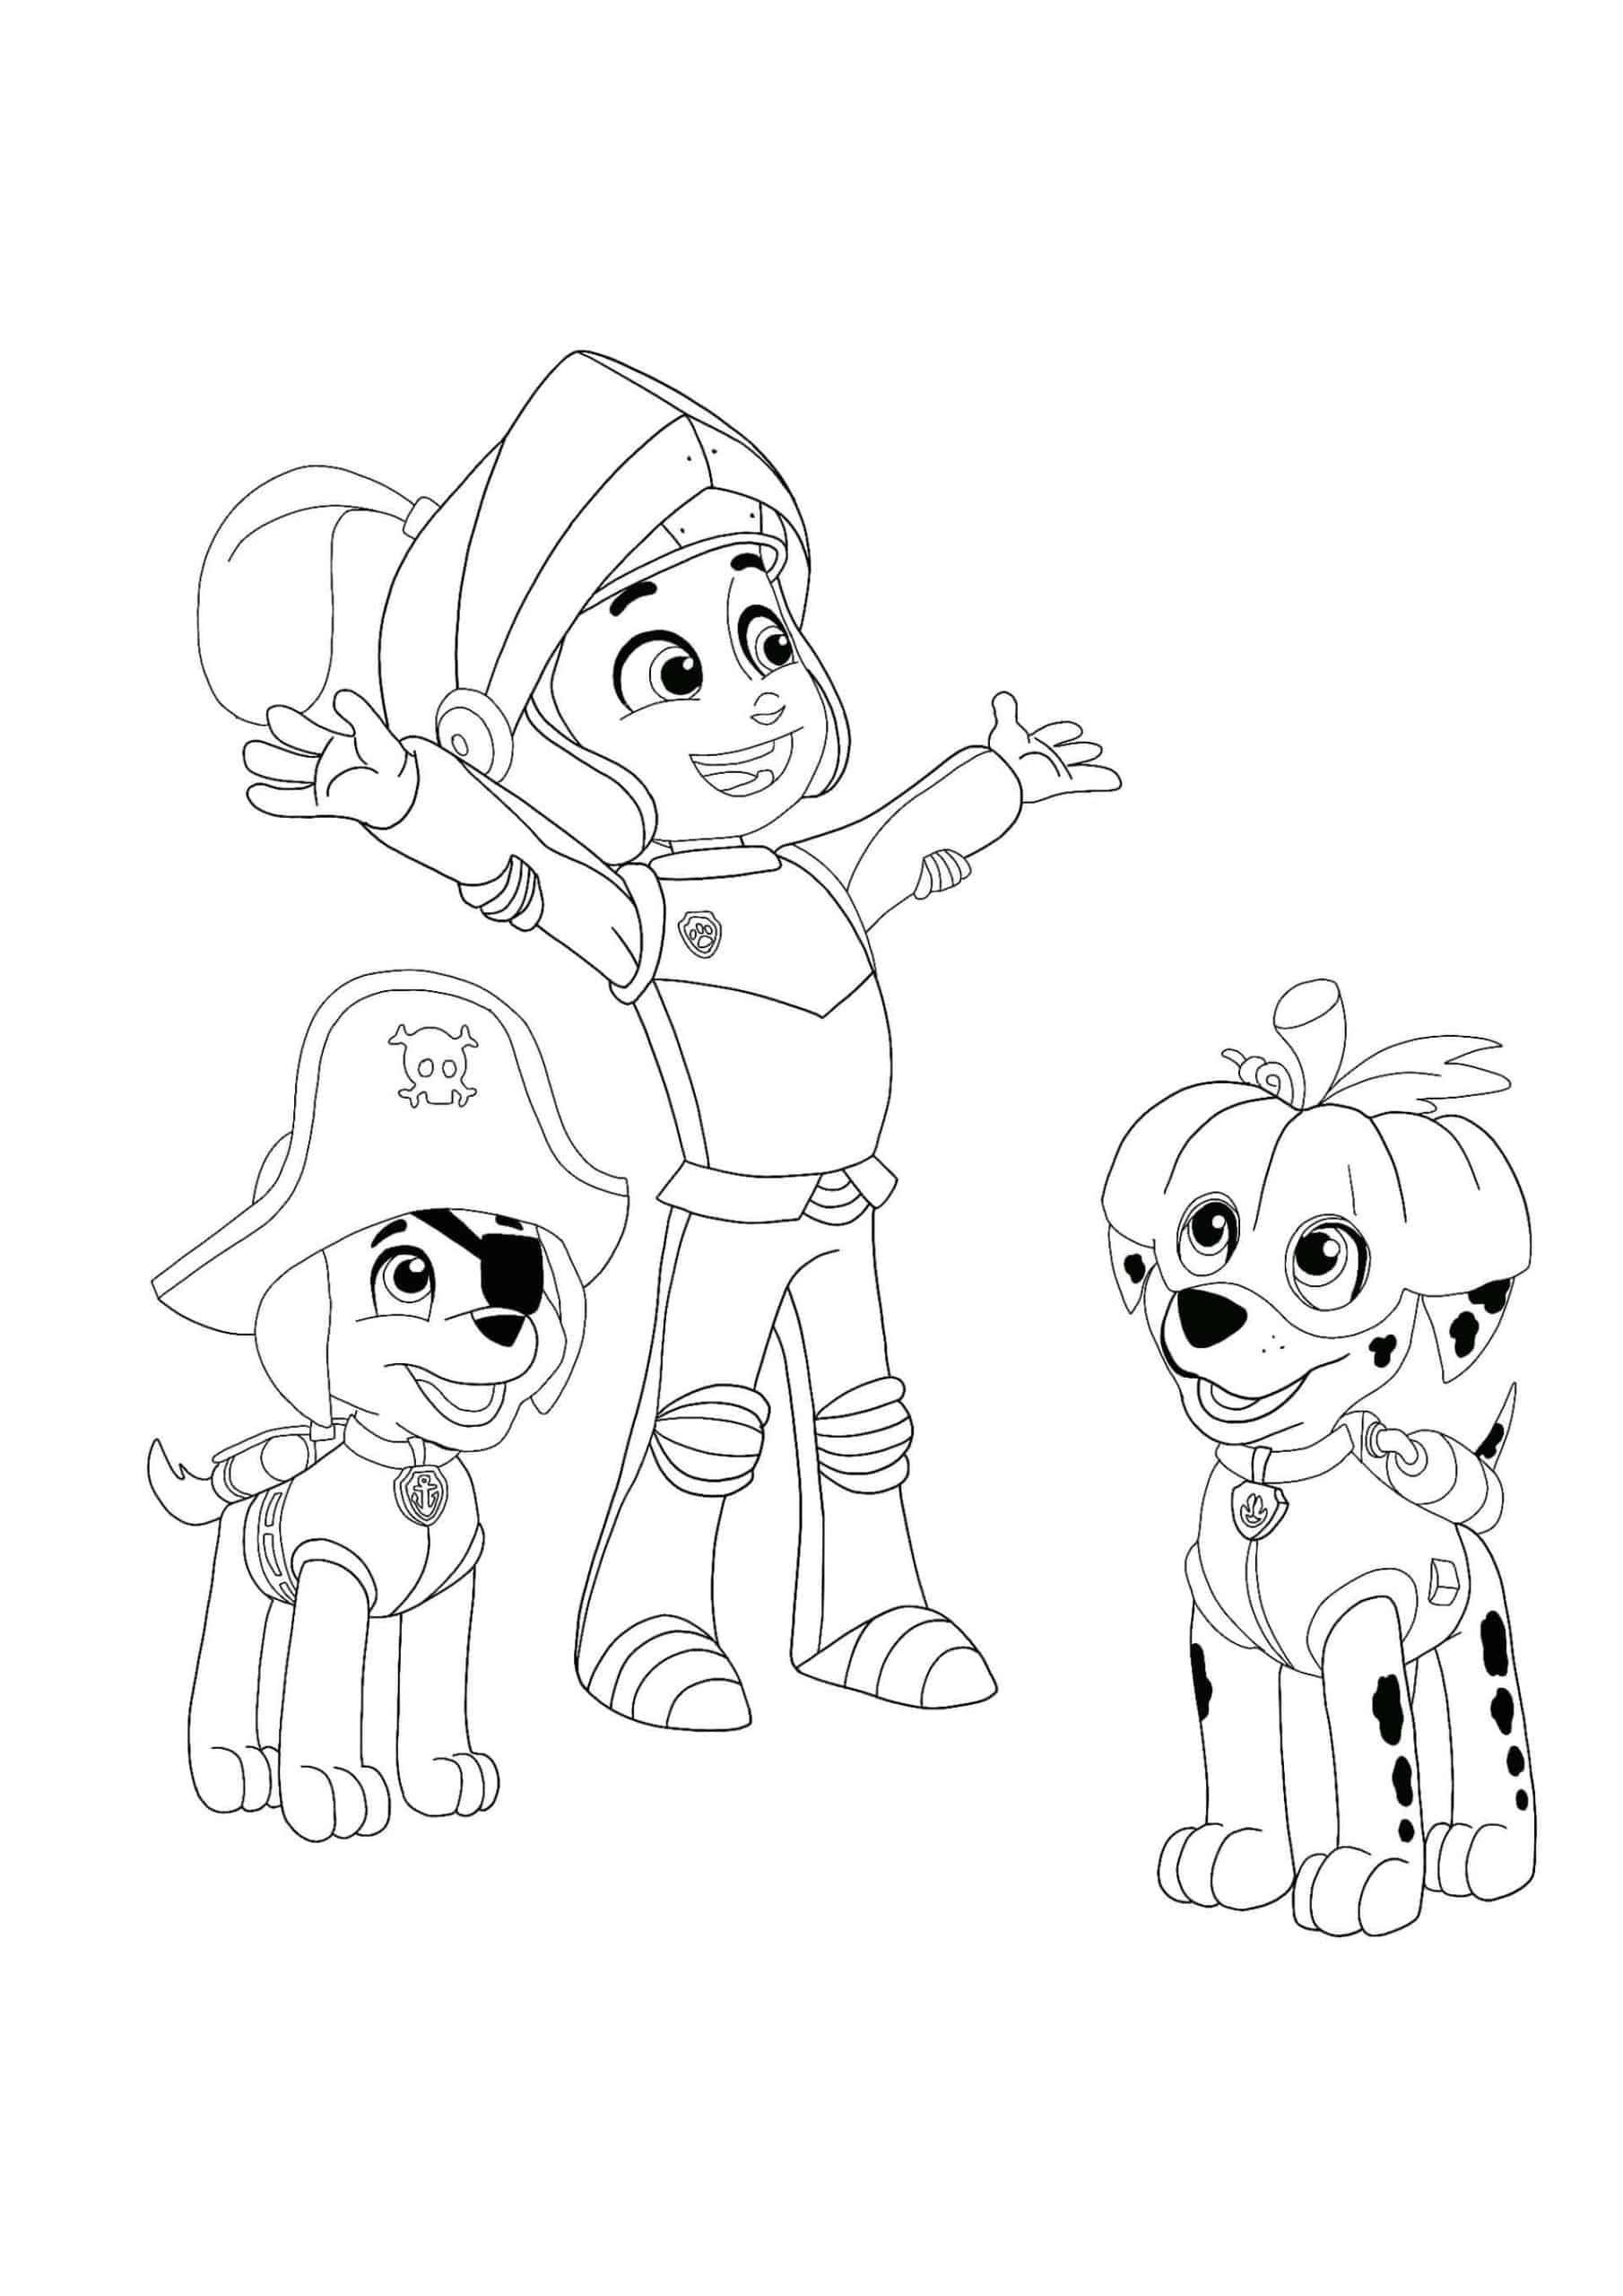 Paw Patrol Halloween Coloring Pages - 8 Free Printable Coloring Sheets